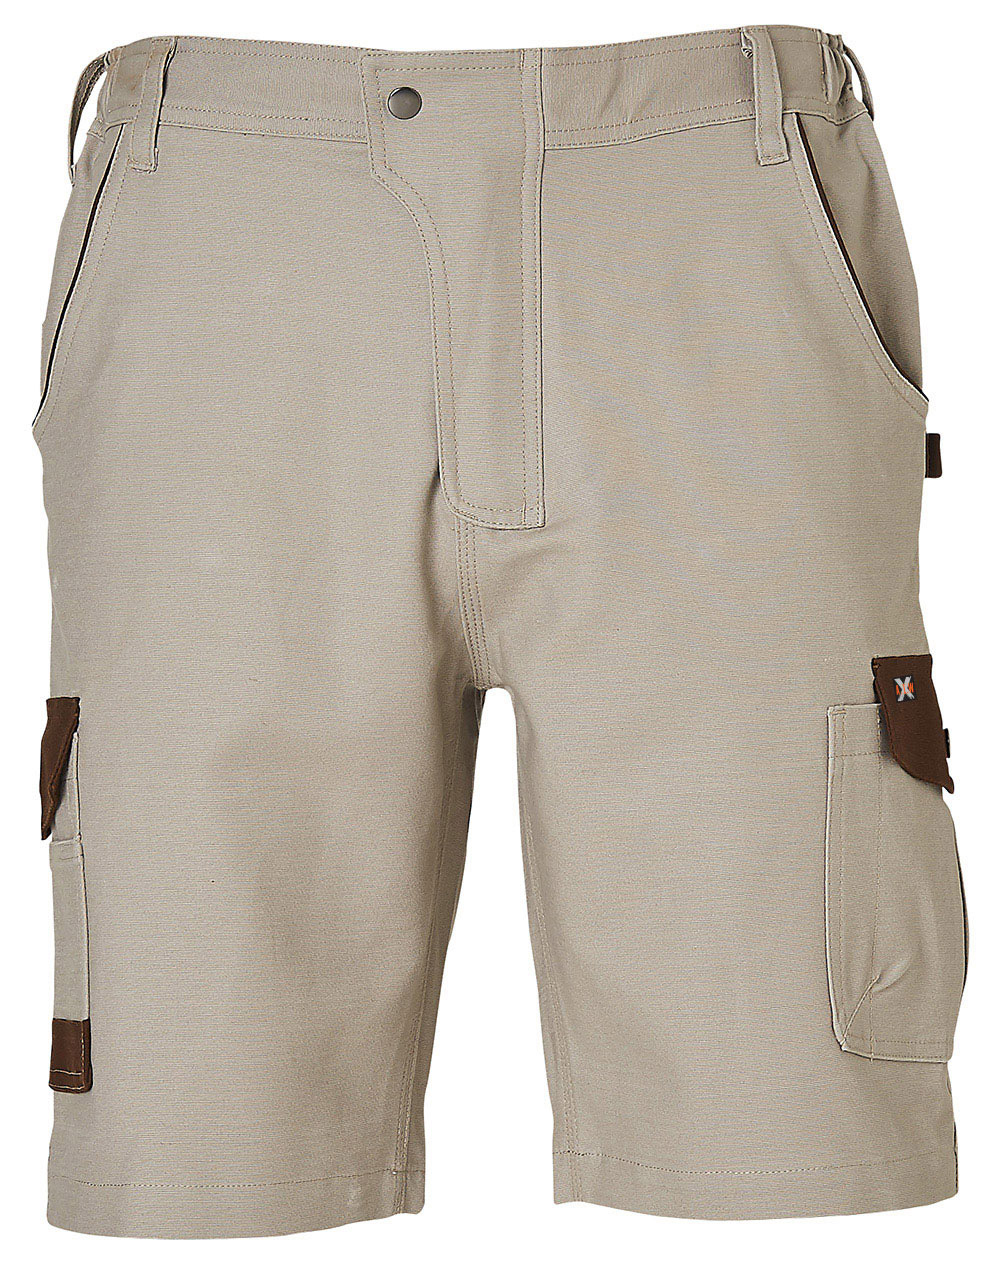 WP23 MENS STRETCH CARGO WORK SHORTS WITH DESIGN PANEL TREATMENTS